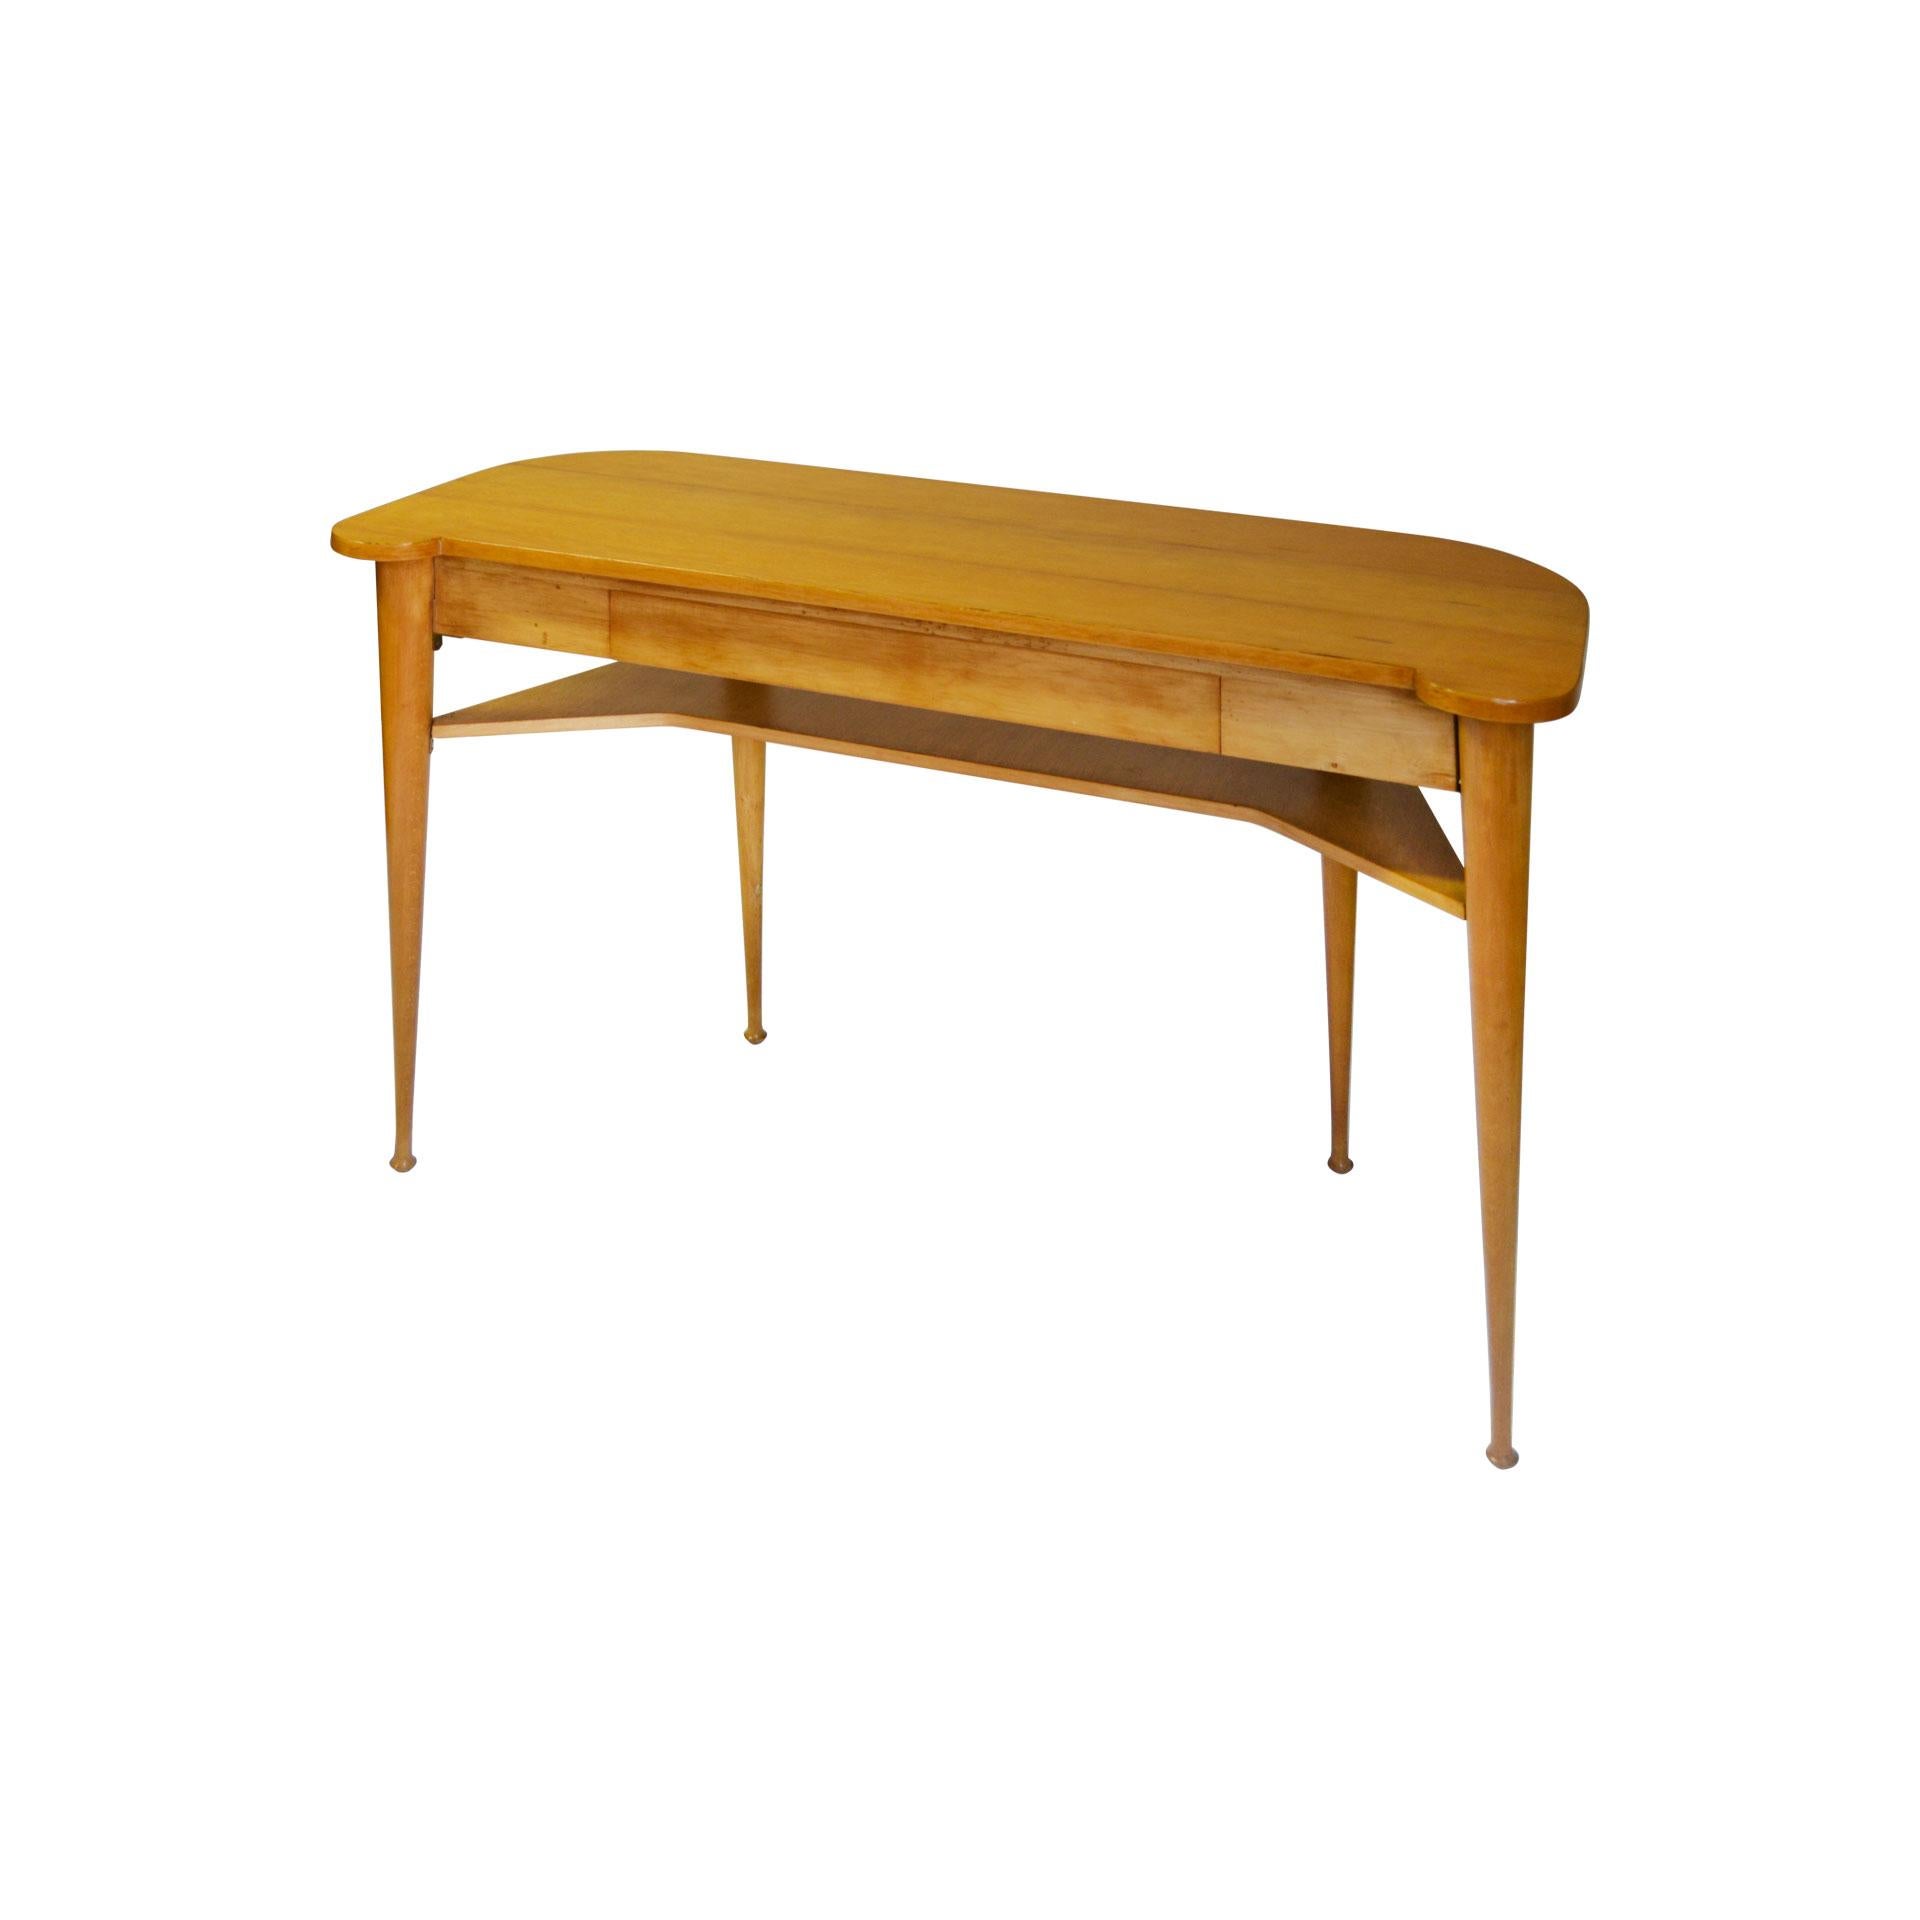 Wooden console table with a drawer of the 1950s Italian production. Very good condition, original in all its parts.